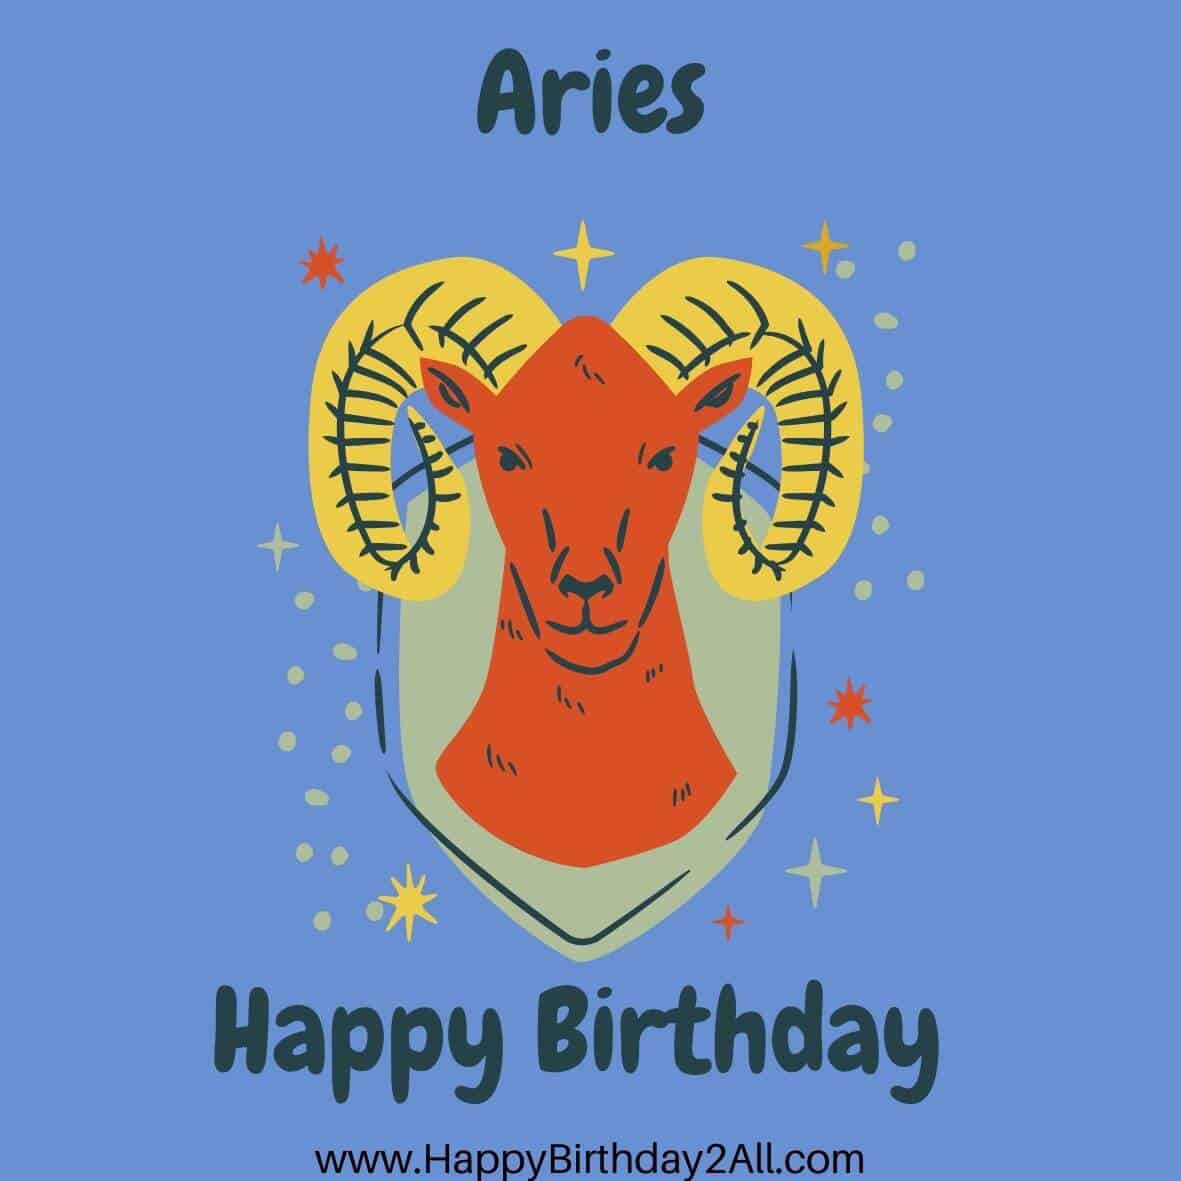 What is the birthday for Aries?